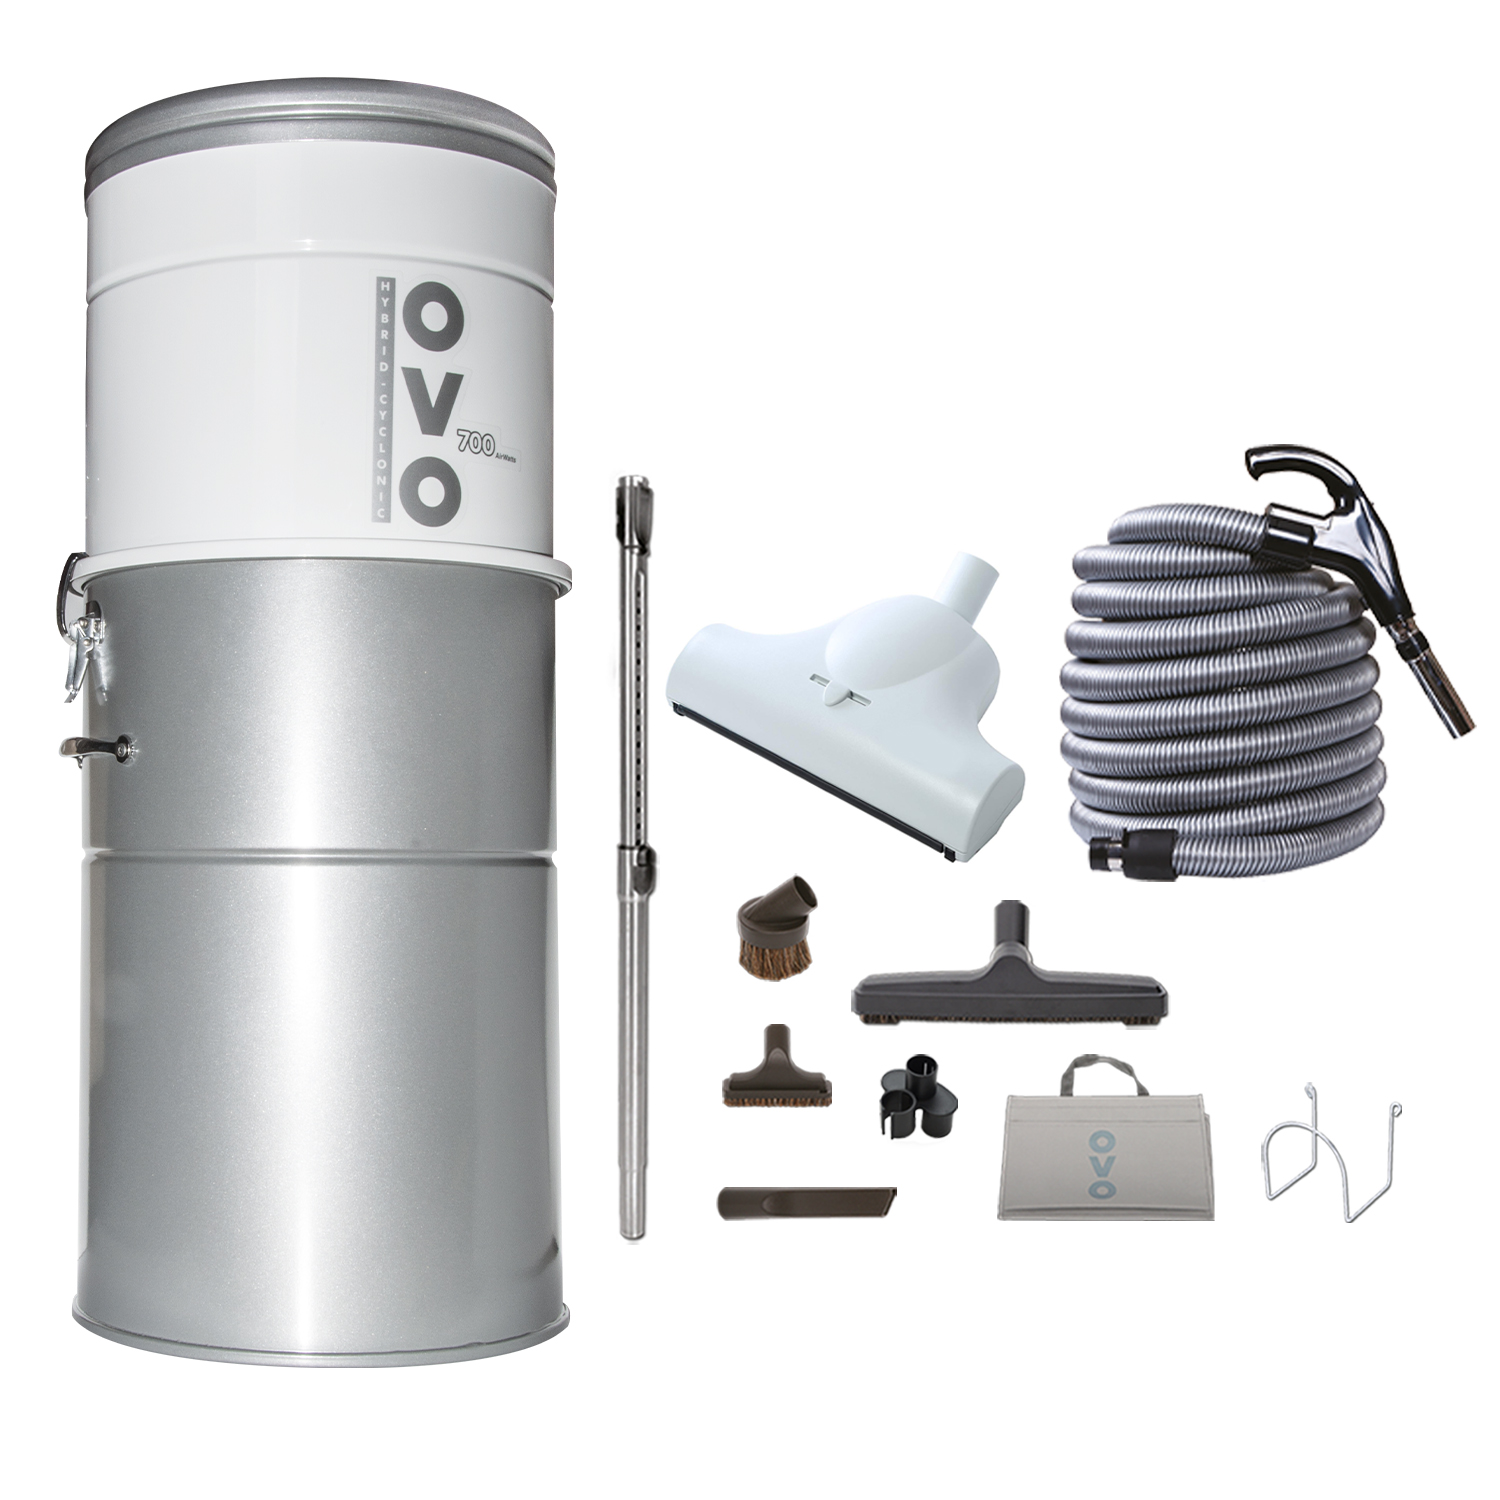 The Best central vacuum system - OVO vacuum with kit included